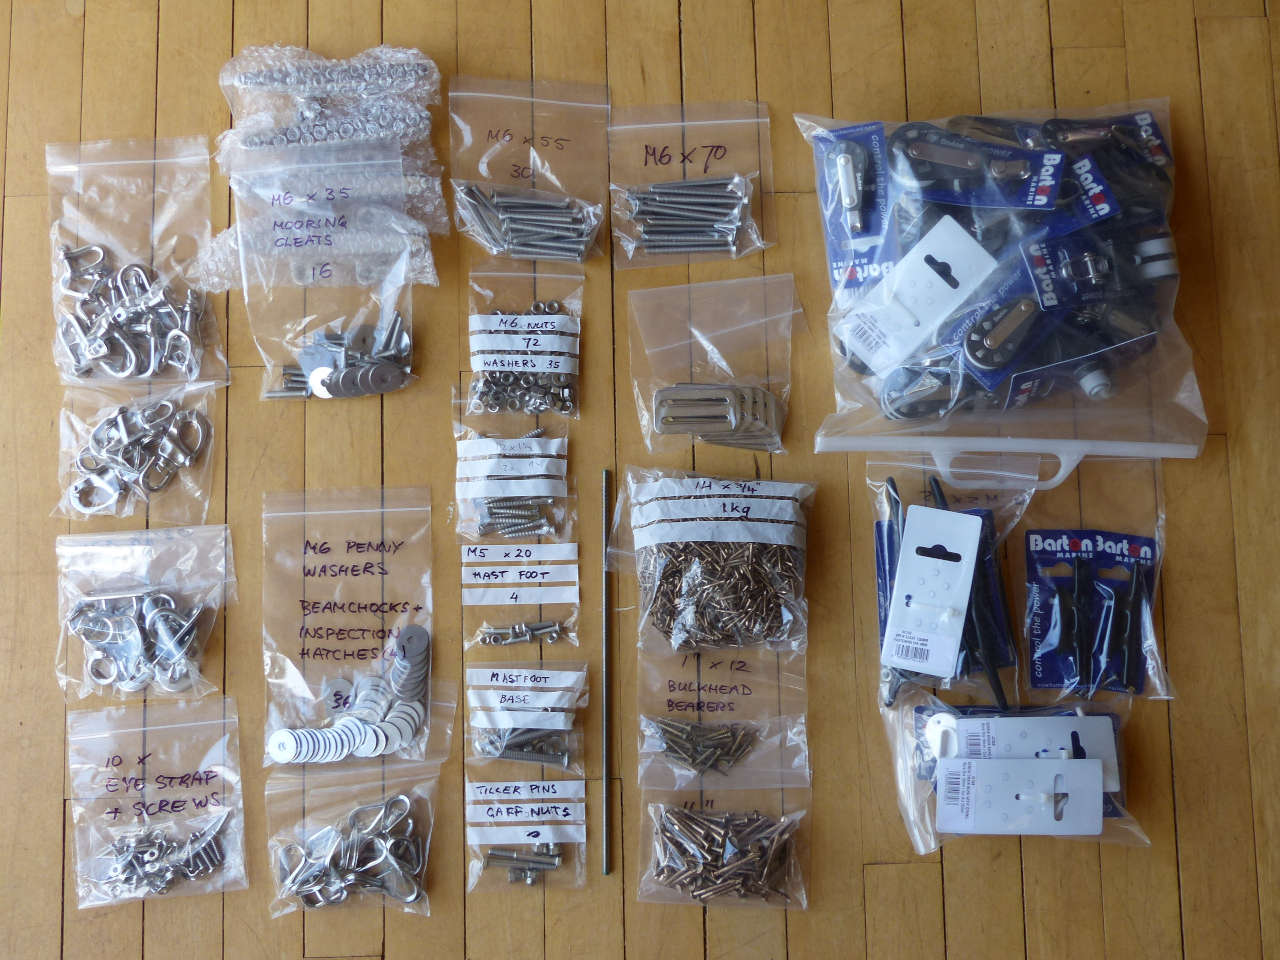 Bags of fittings and ropes